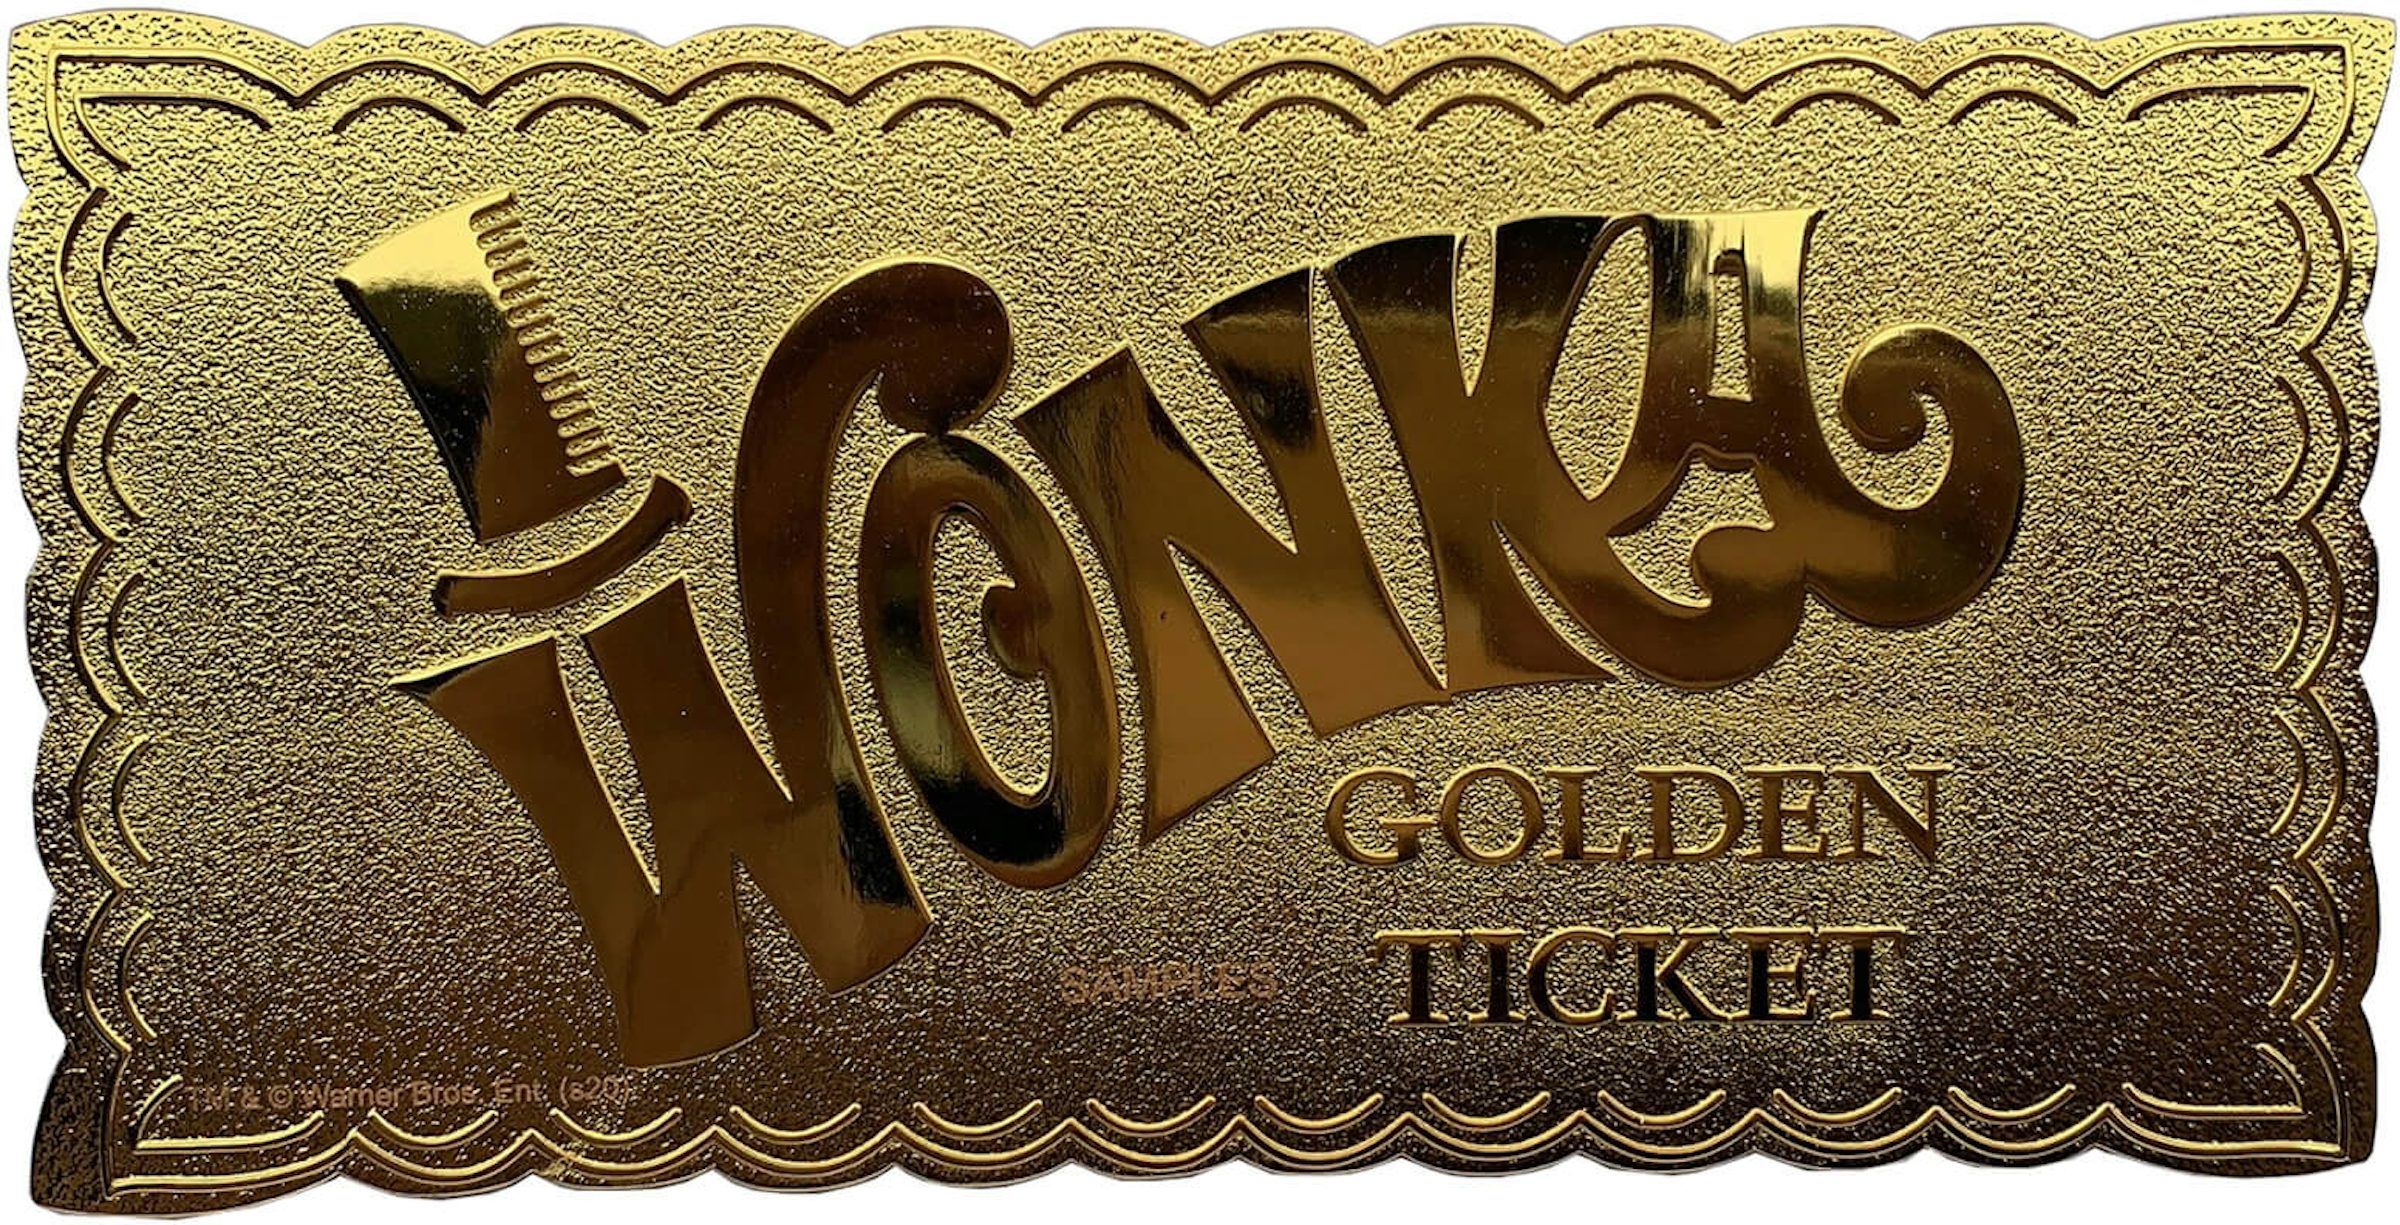 Ticket D' Gold Willy Wonka Charlie And Chocolate Factory Golden Ticket